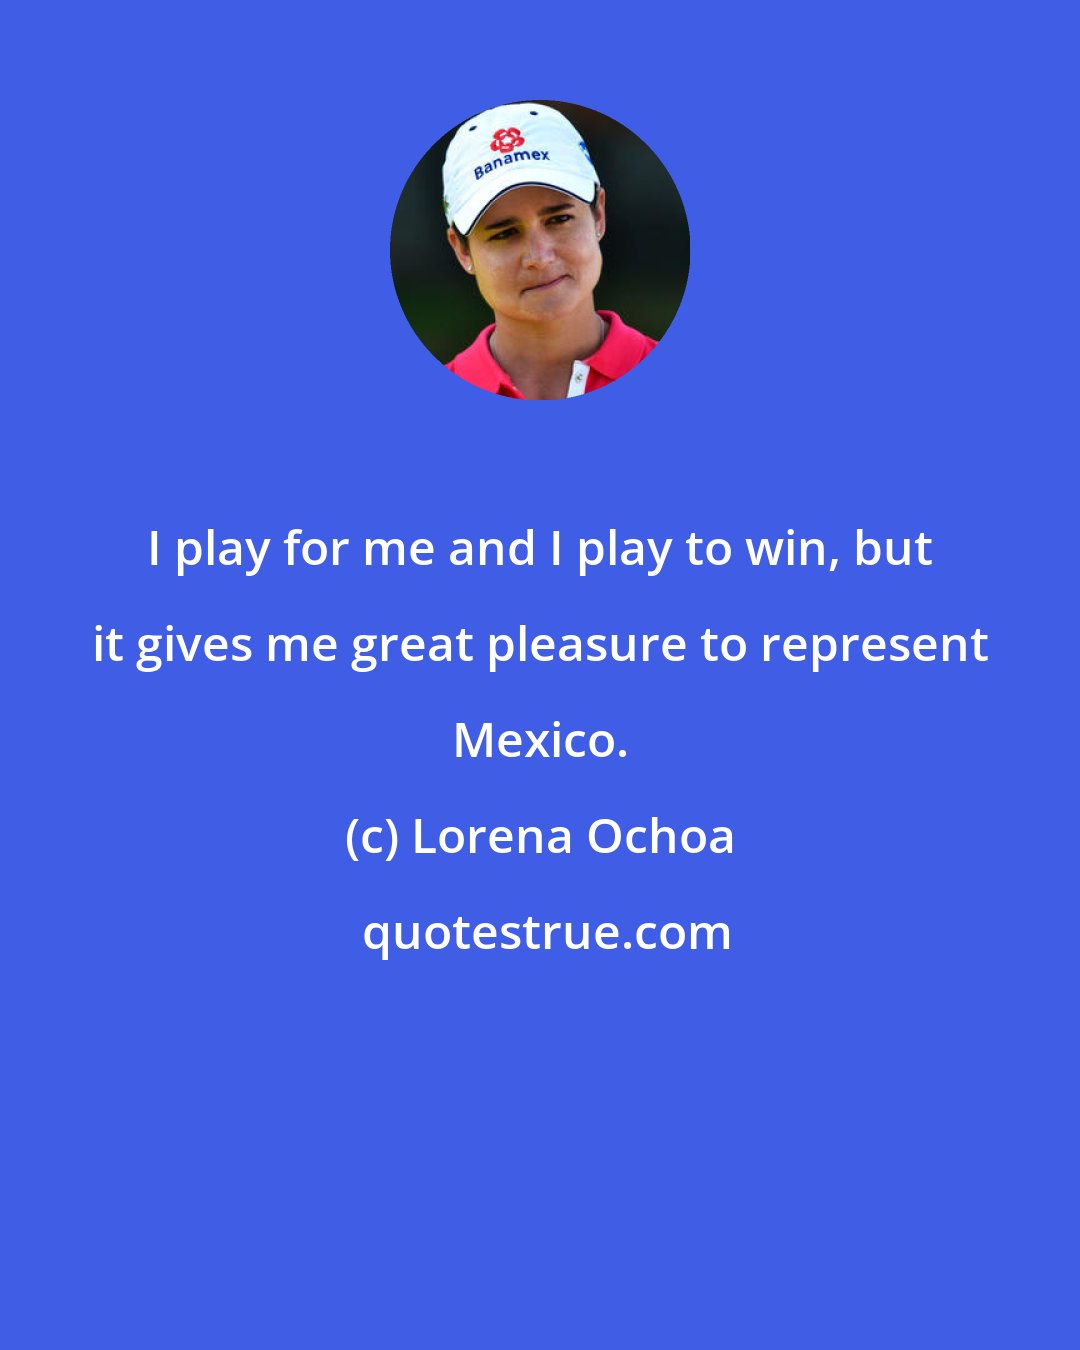 Lorena Ochoa: I play for me and I play to win, but it gives me great pleasure to represent Mexico.